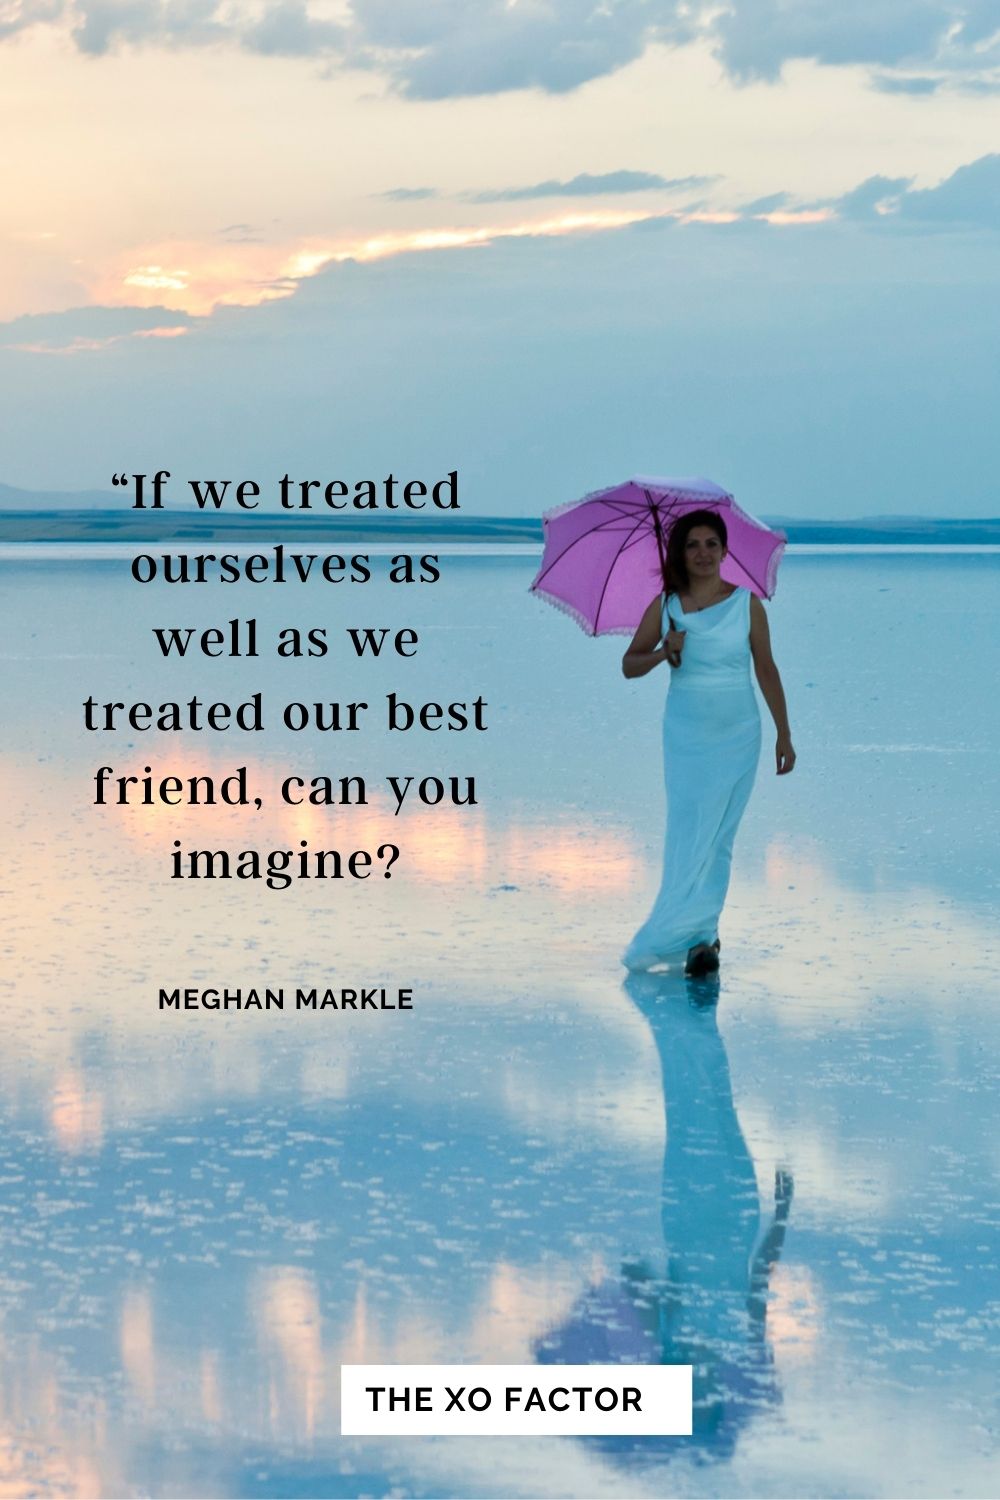 If we treated ourselves as well as we treated our best friend, can you imagine? Meghan Markle